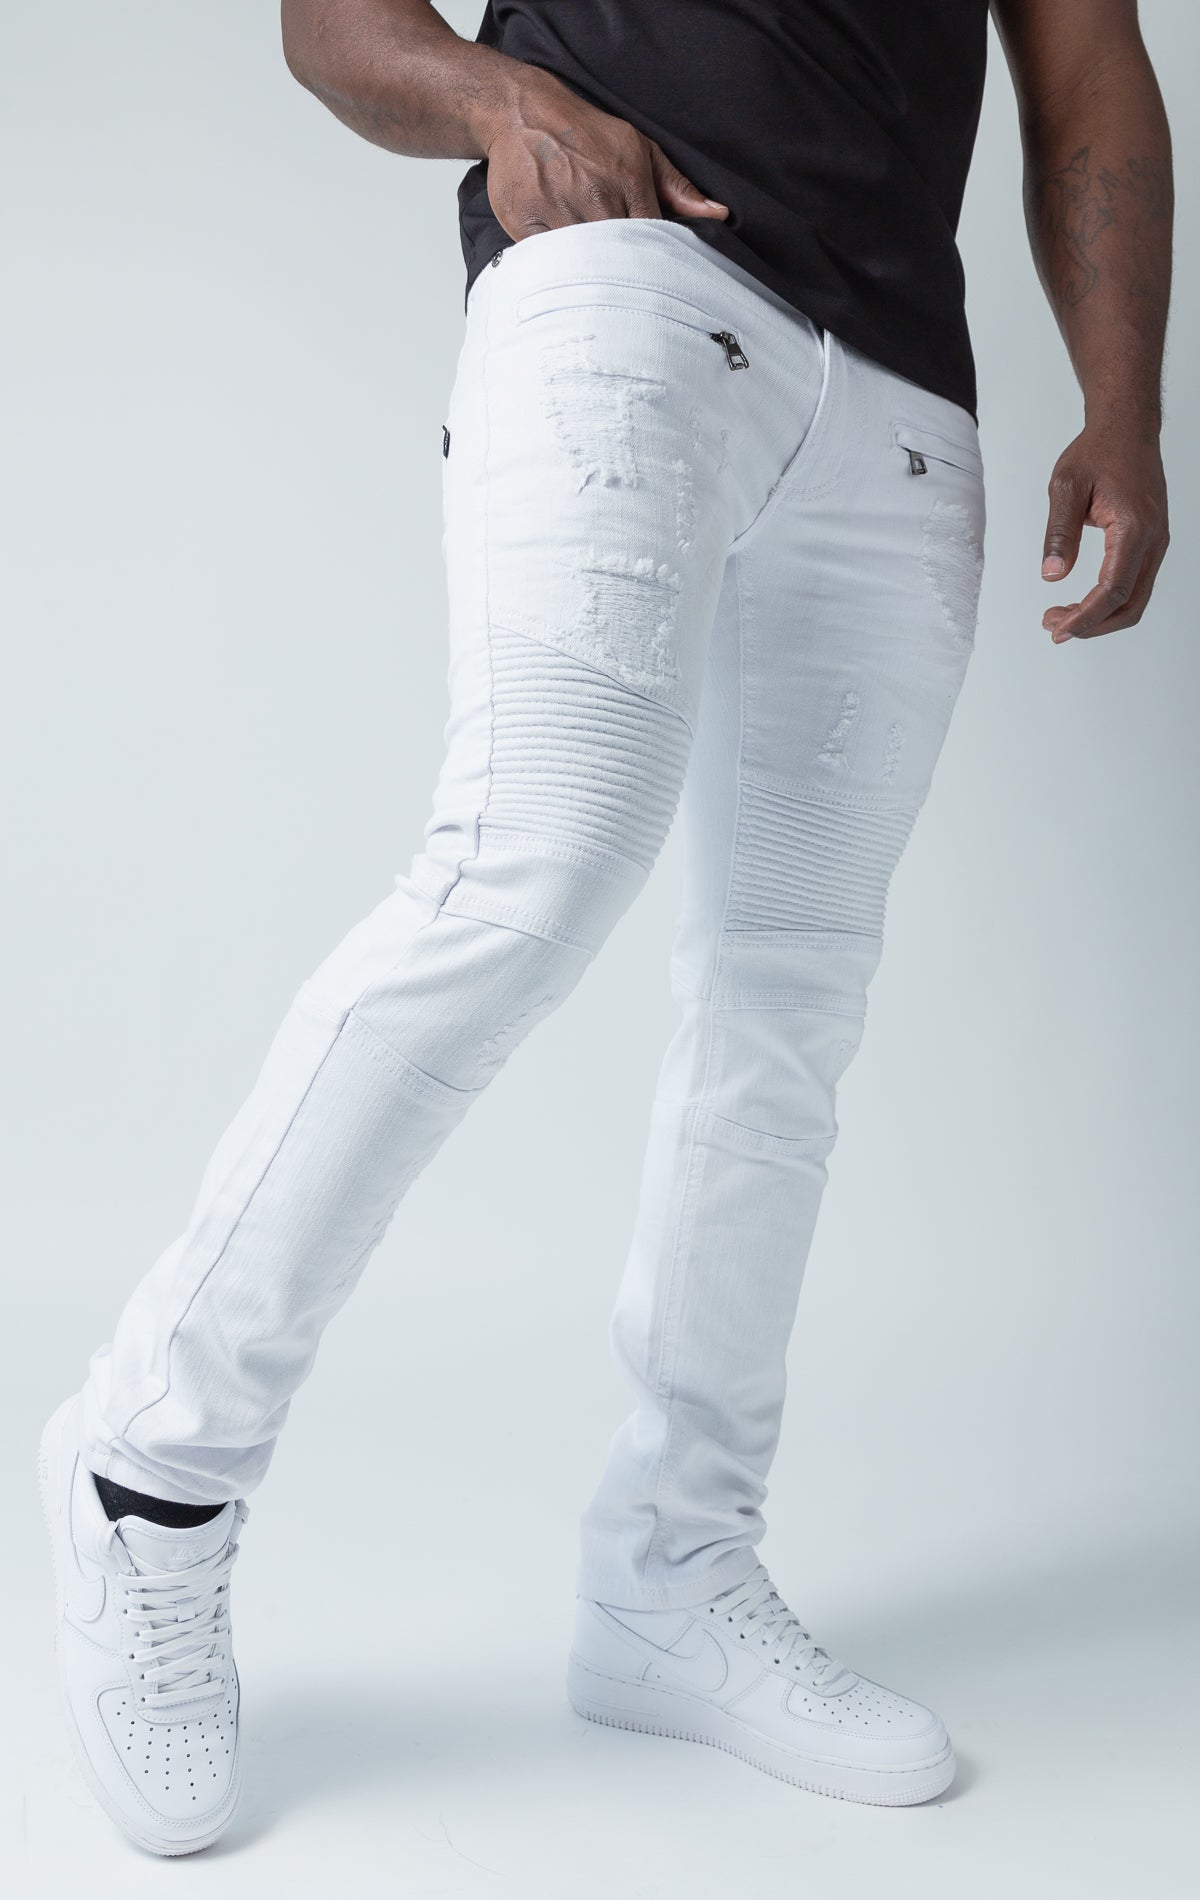 White high-quality denim made from 98% cotton and 2% spandex. With its rip and repair design and slim fit, it's the ultimate blend of style and comfort.